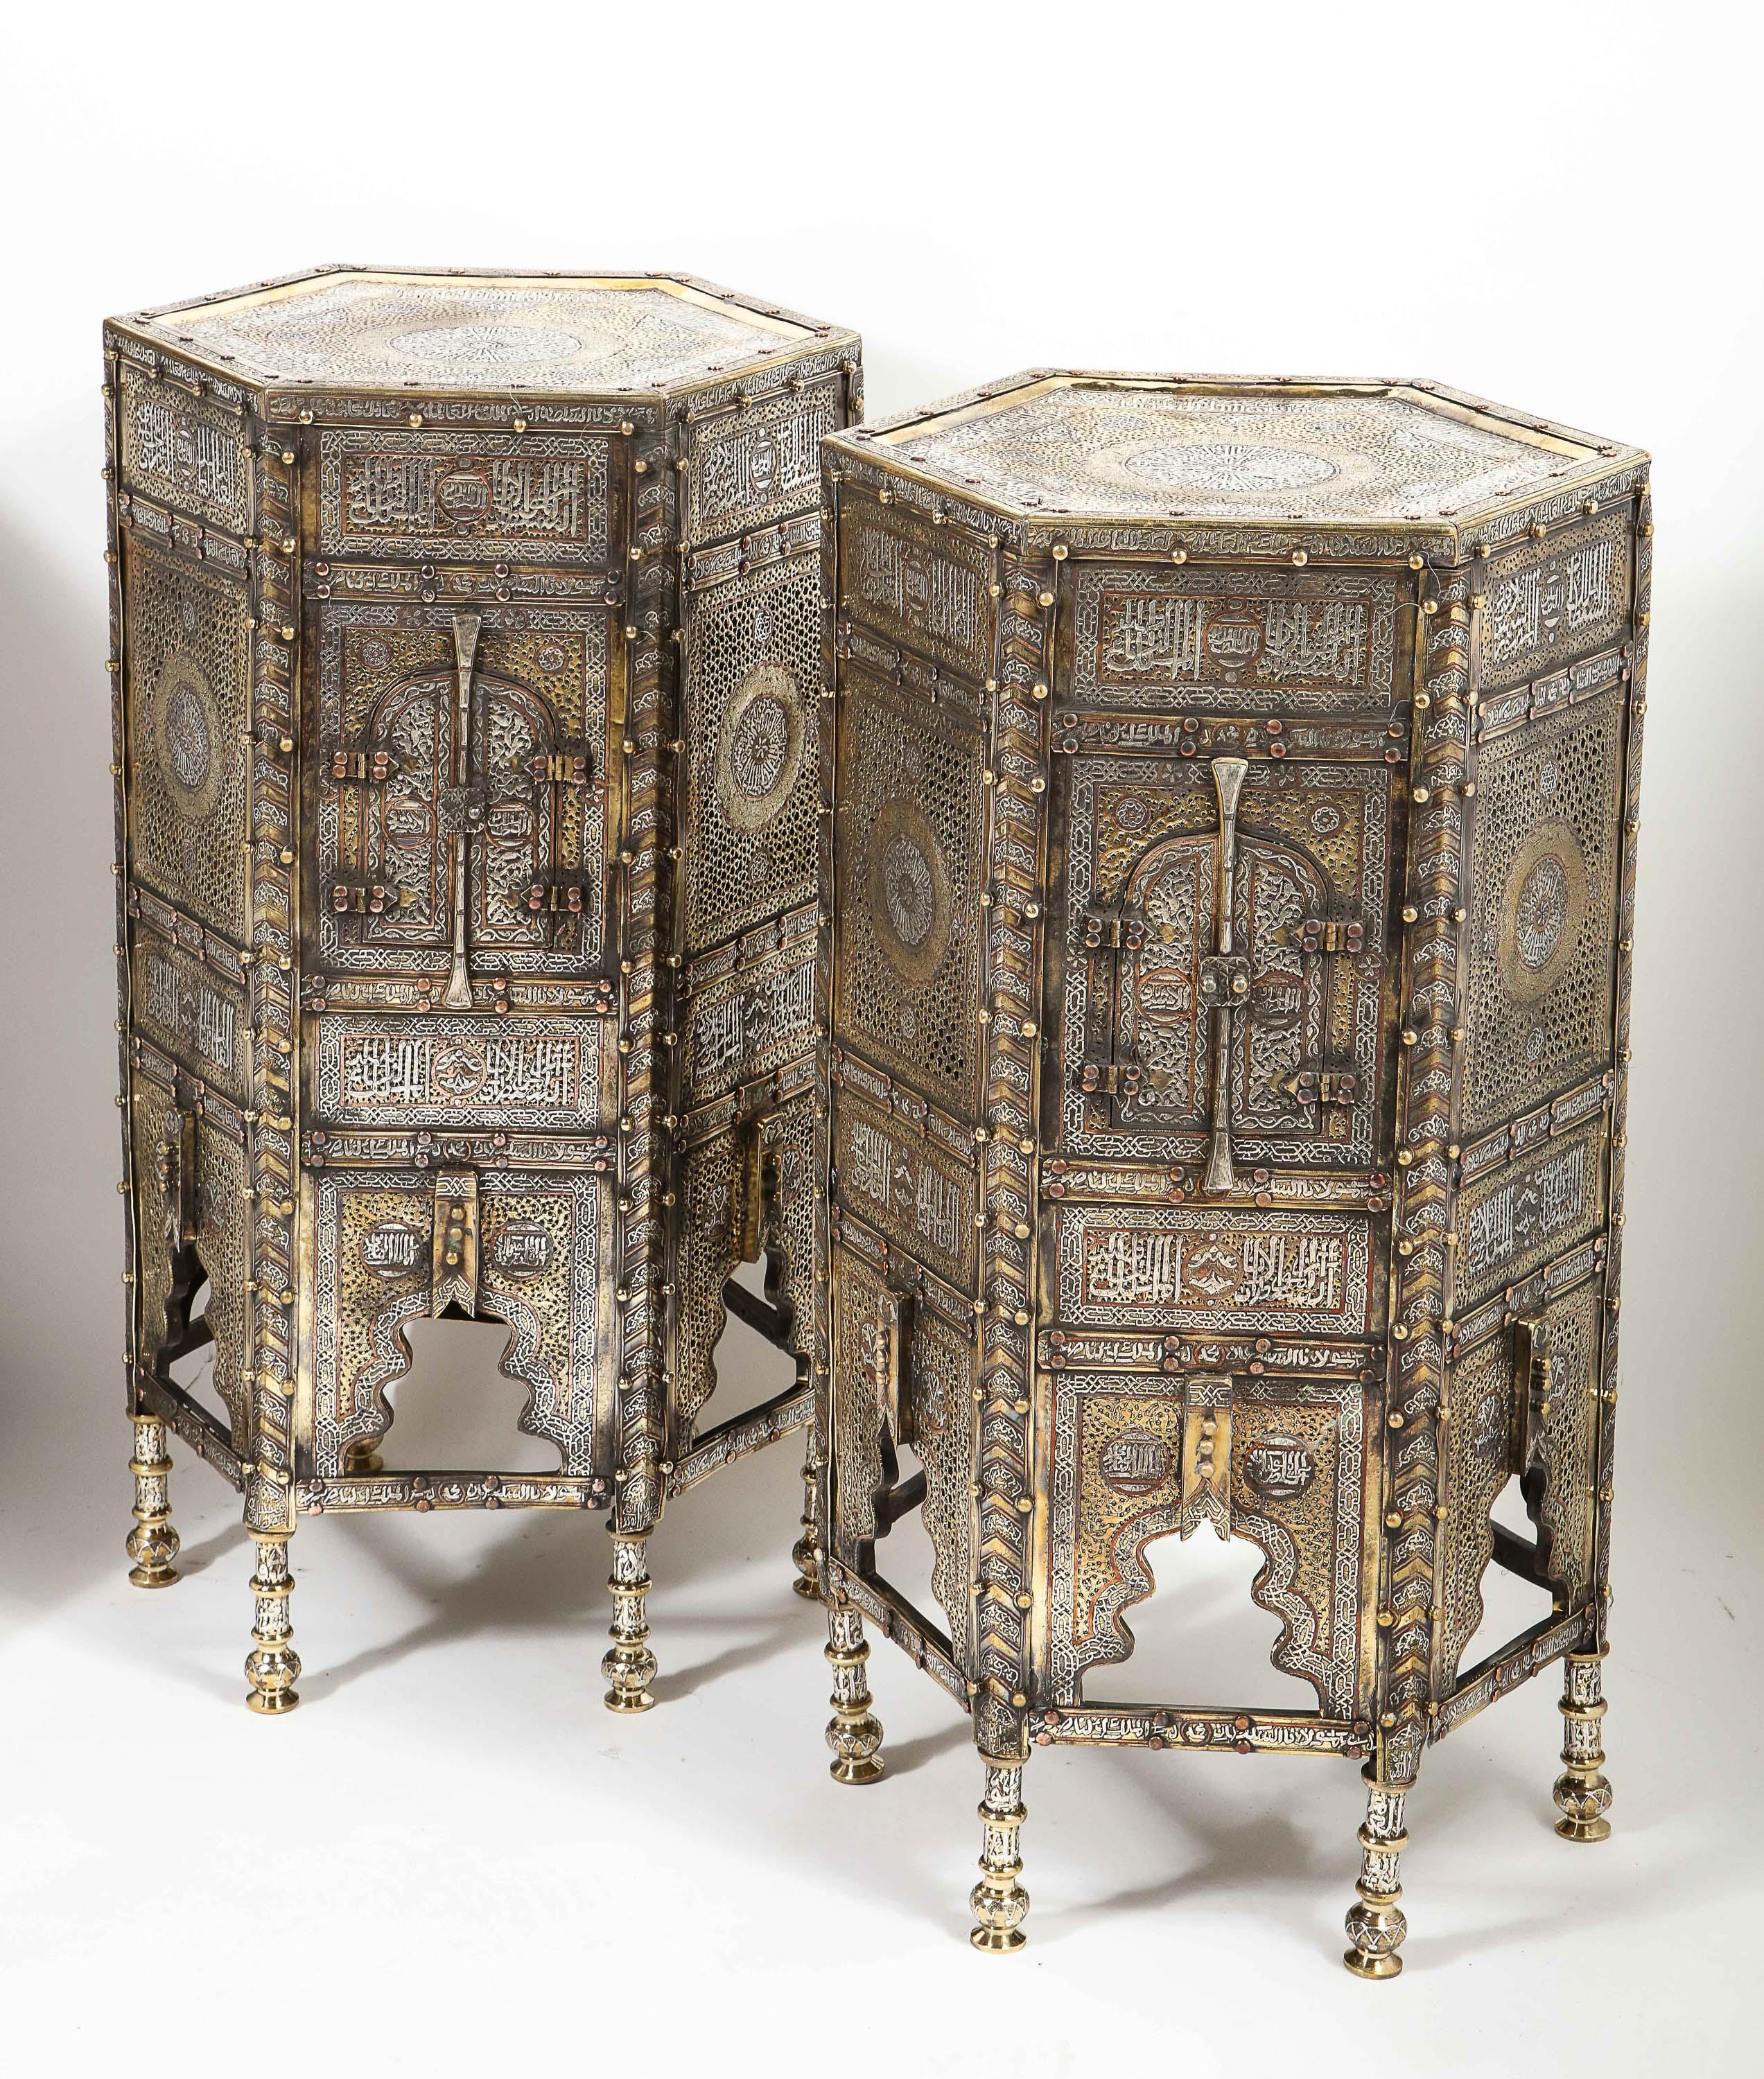 An exceptional and rare pair of Islamic Mamluk Revival silver and copper inlaid Quran Koran side tables, Egypt, circa late 19th century.

Fully silver inlaid cairoware tables. Very decorative with Arabic calligraphy throughout. Similar ones in